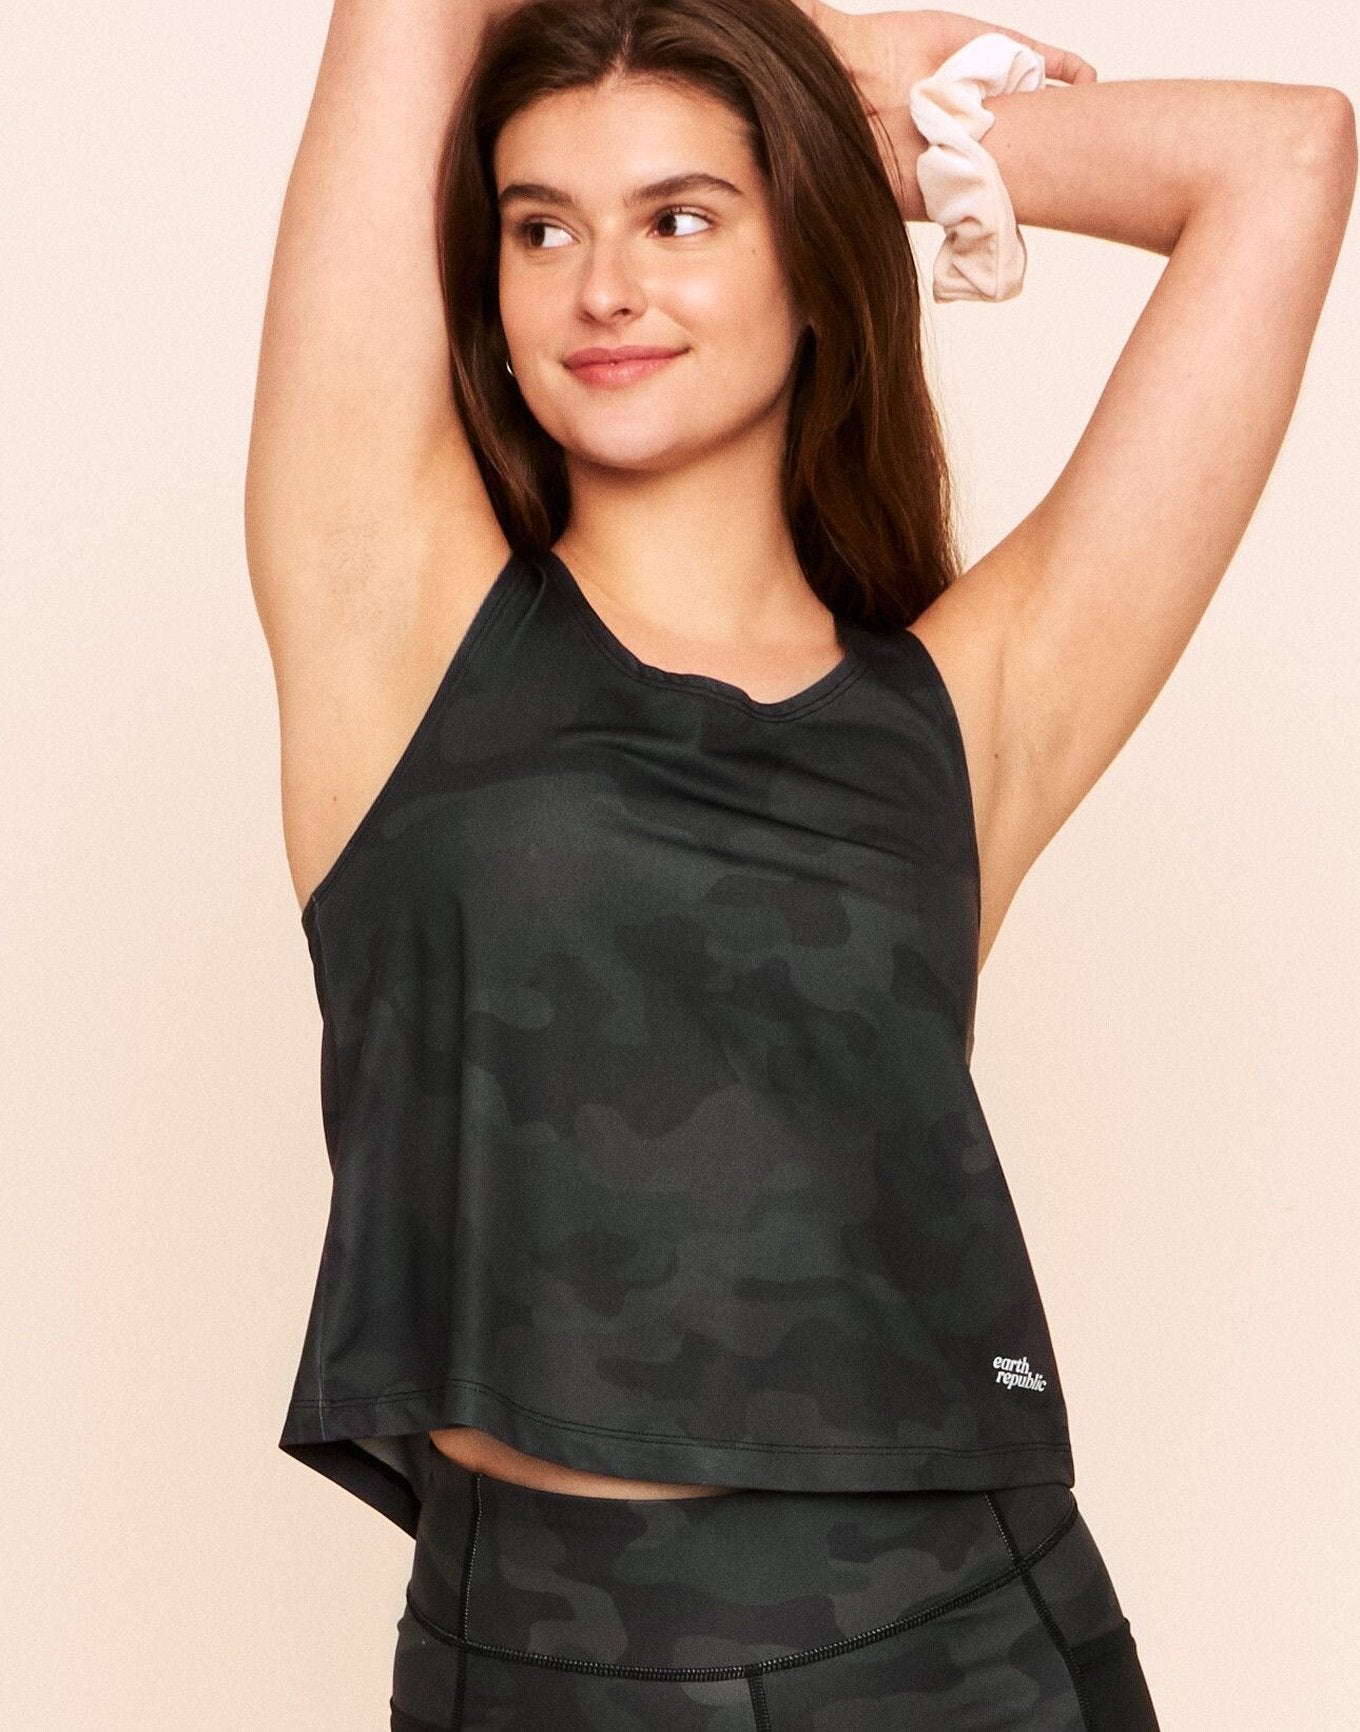 Earth Republic Micah Cropped Tank Cropped Tank in color Dark Camo and shape tank